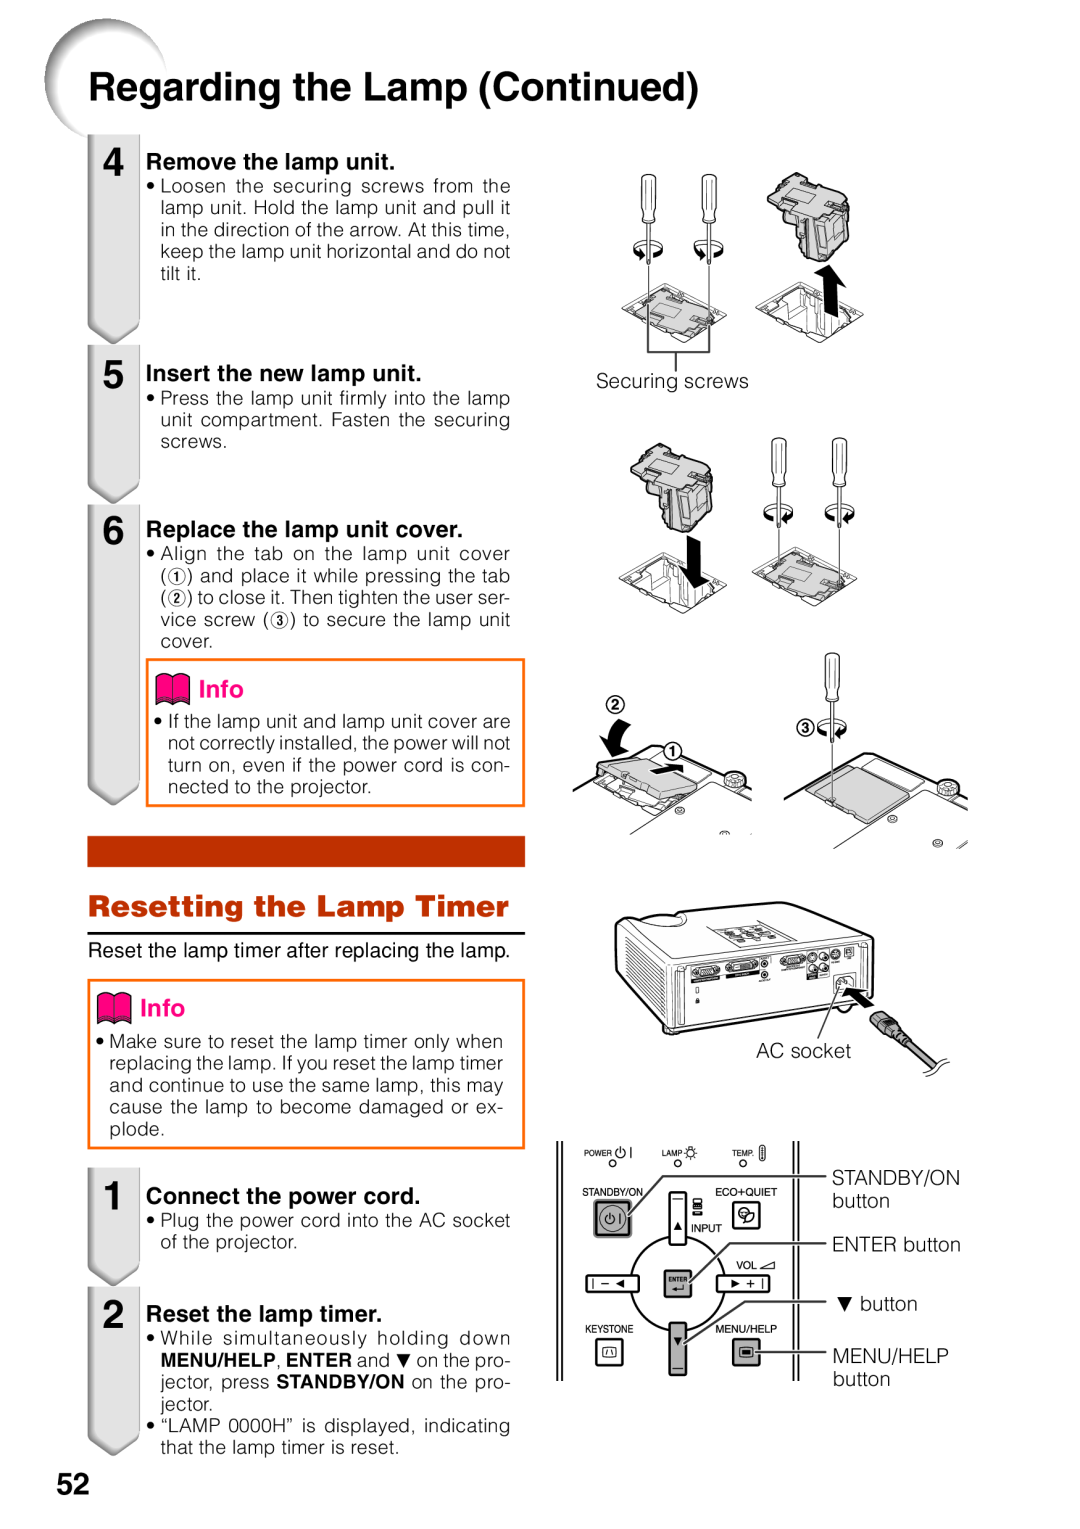 Sharp XR-30S Regarding the Lamp Continued, Resetting the Lamp Timer, Info, Remove the lamp unit, Insert the new lamp unit 